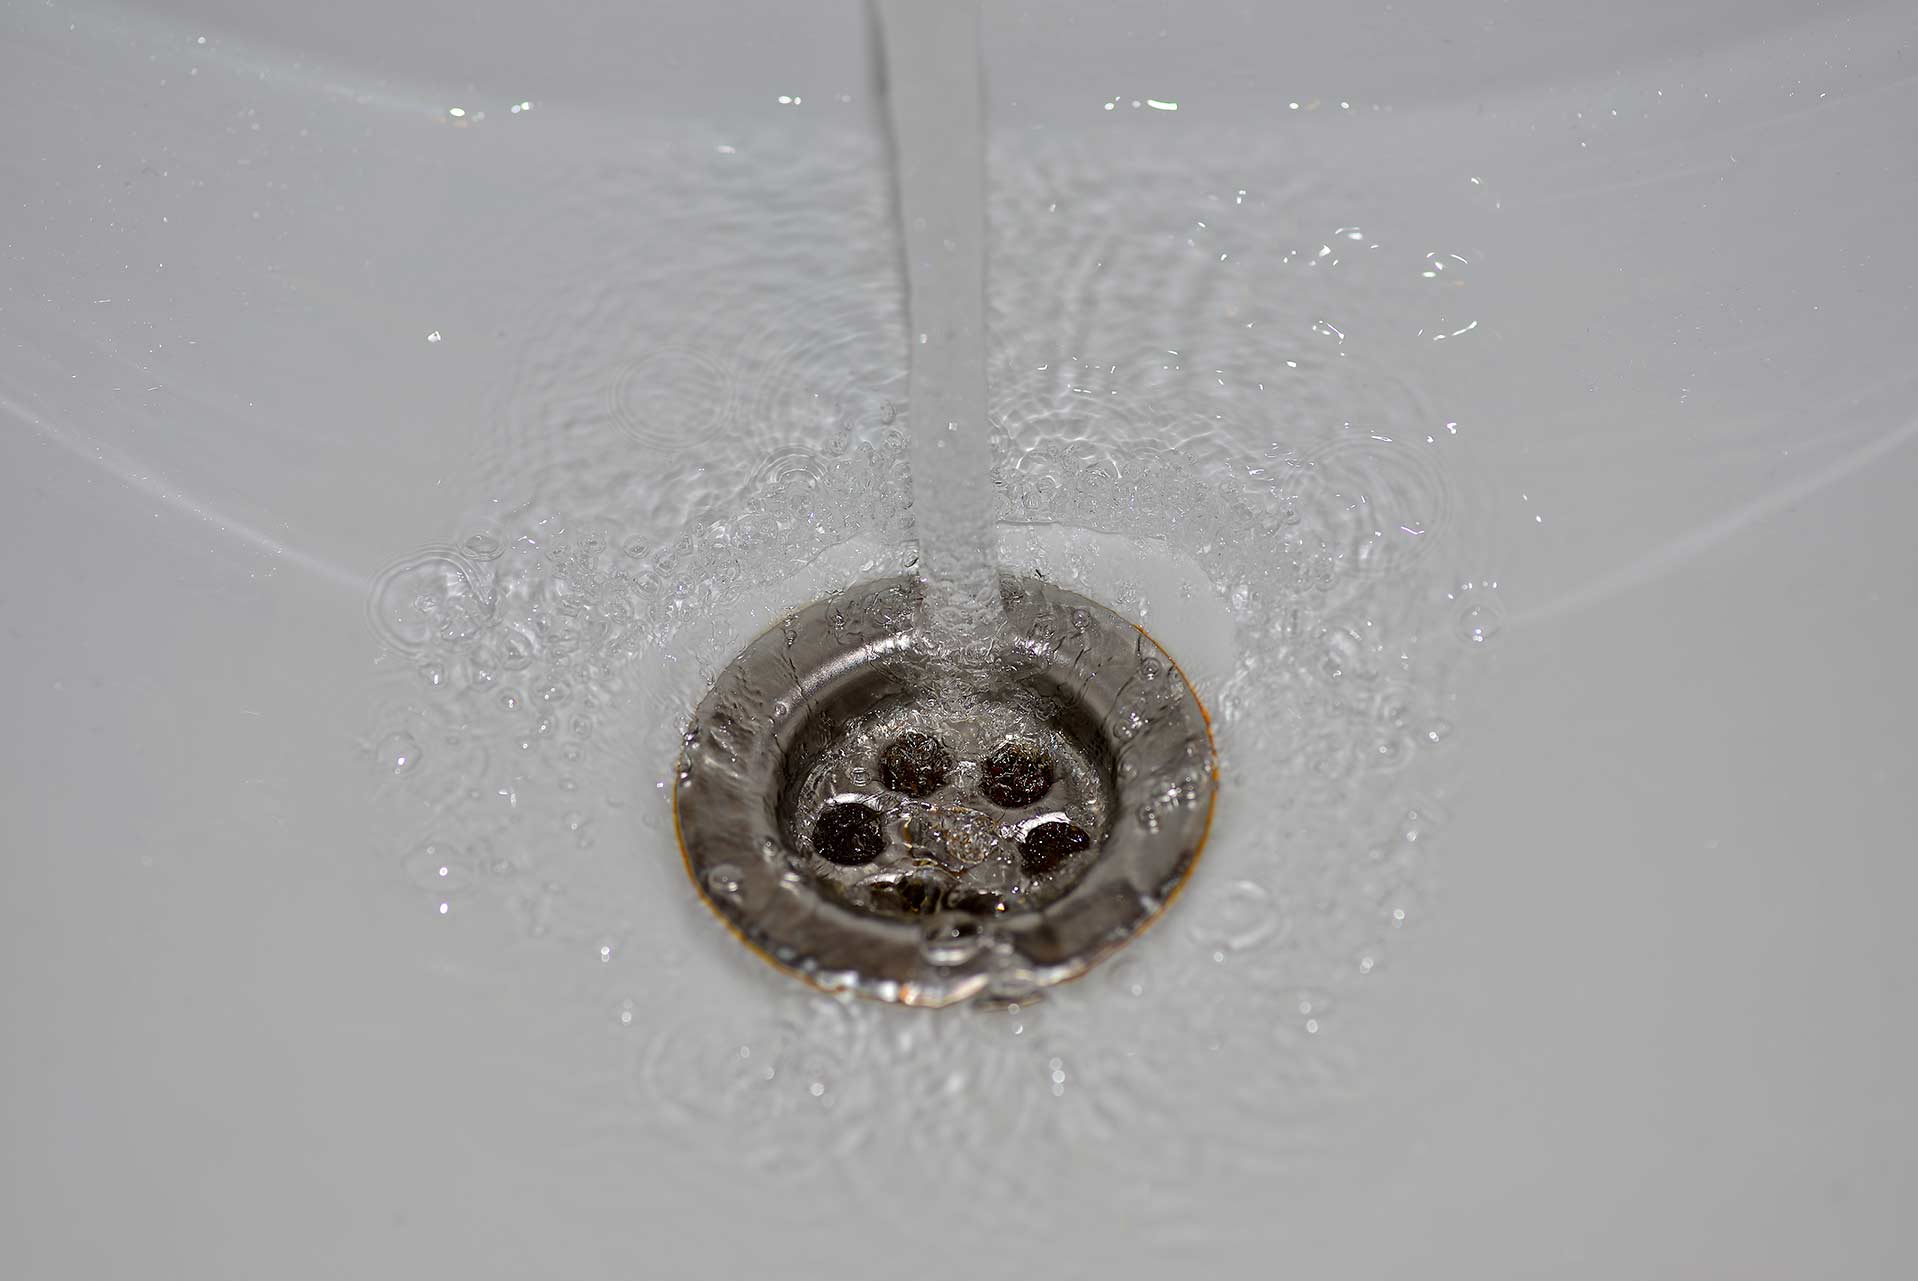 A2B Drains provides services to unblock blocked sinks and drains for properties in Sands End.